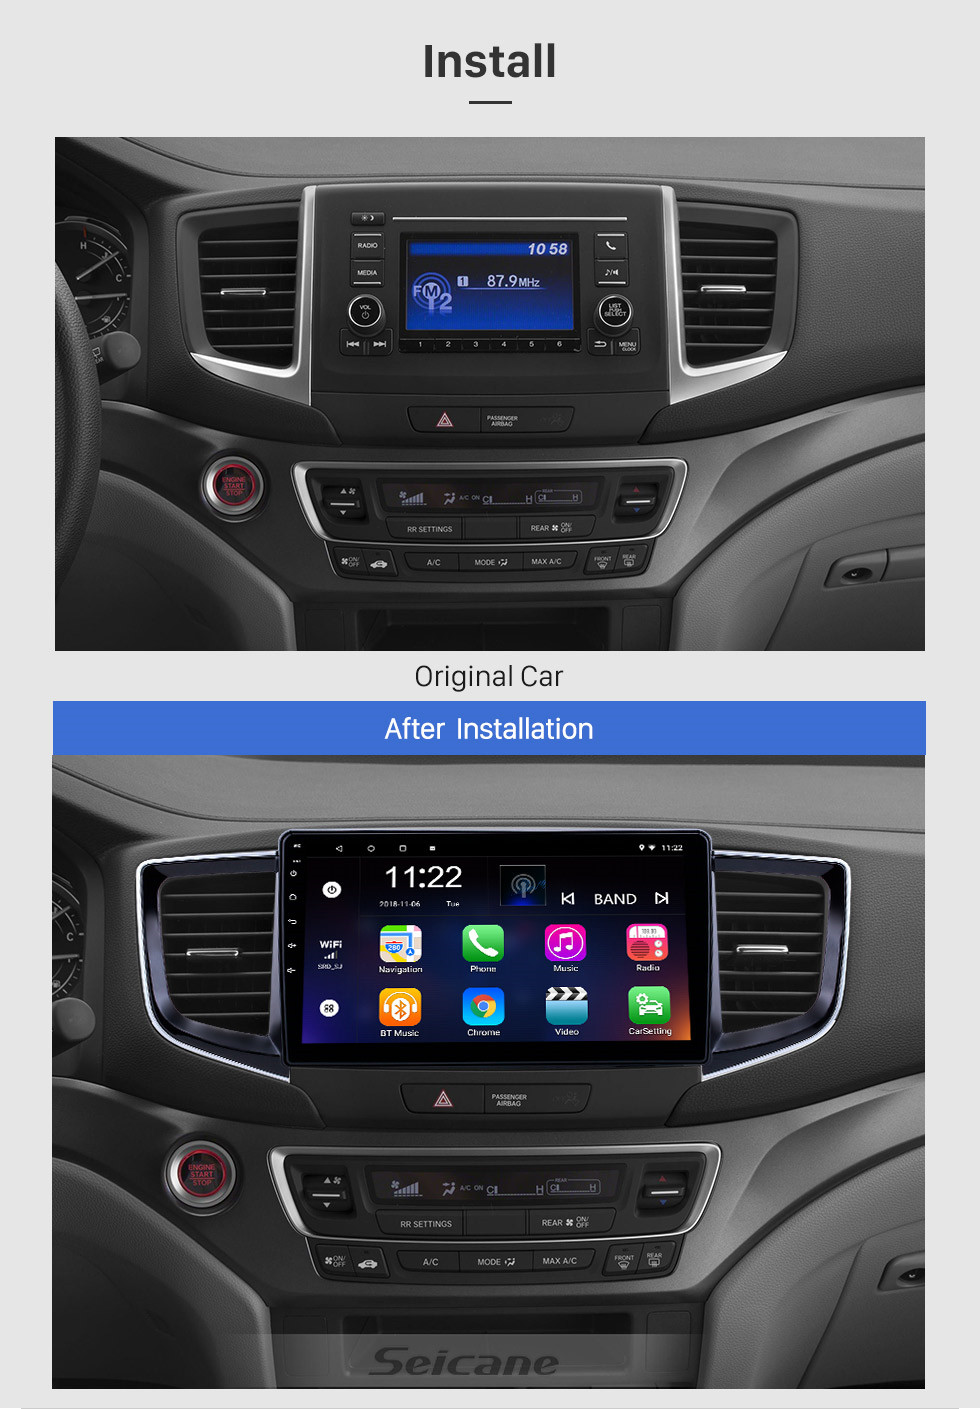 Seicane 10.1 Inch Car Audio System Android 13.0 for 2016 Honda Pilot with Touchscreen WIFI Bluetooth Support GPS Navi Carplay Steering Wheel Control